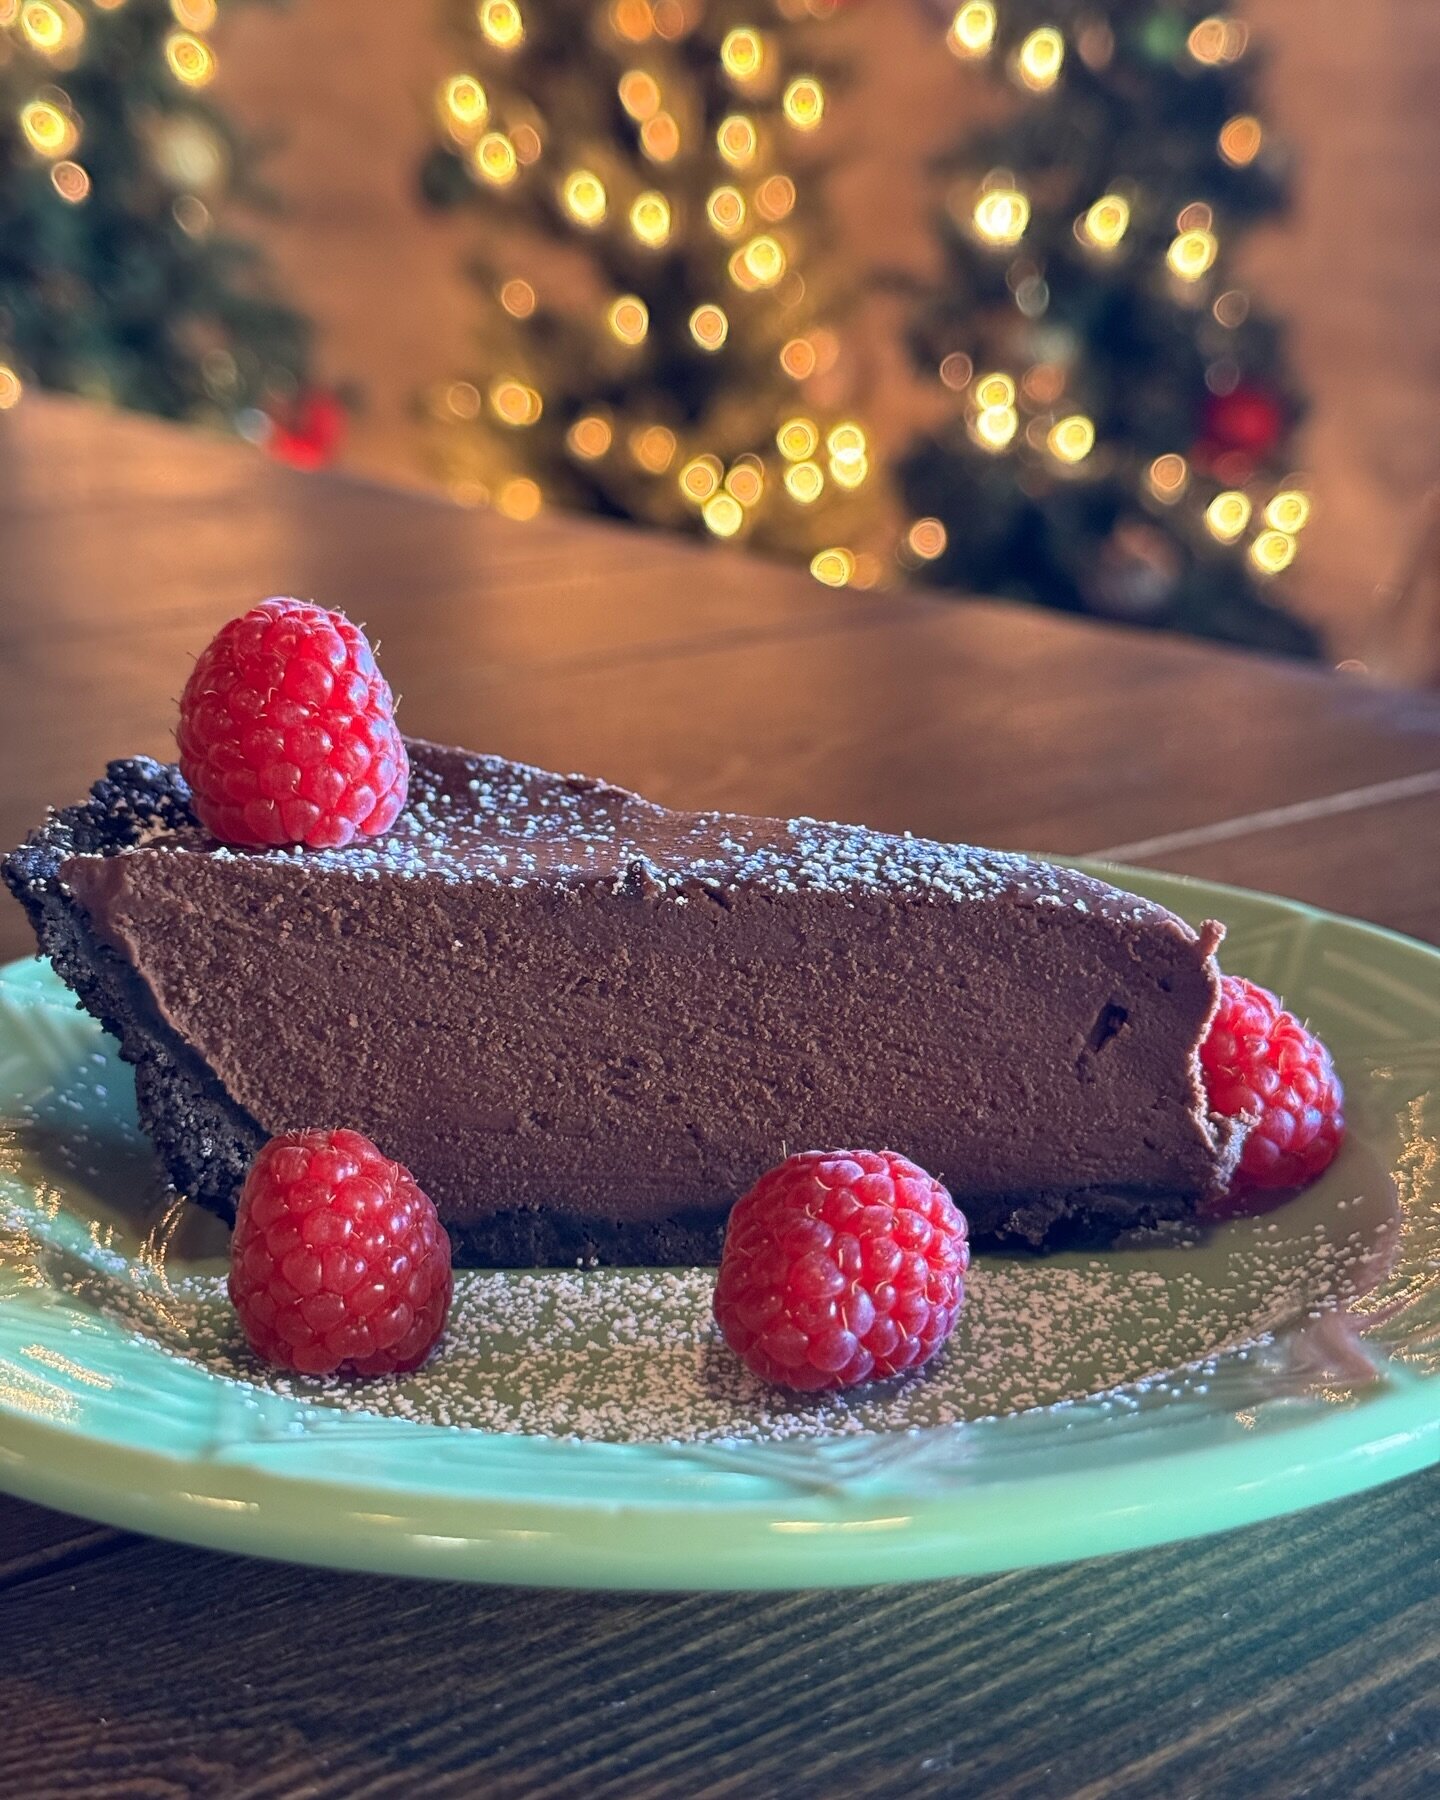 It&rsquo;s not the holidays without some tasty desserts! Try this easy No Bake Chocolate Torte!🎄

Ingredients:
● 2 1&frasl;2 cups Oreo cookie crumbs, about 26 Oreo Cookies
● 6 tablespoons unsalted butter, melted
● 1 cup heavy whipping cream
● 2 cups